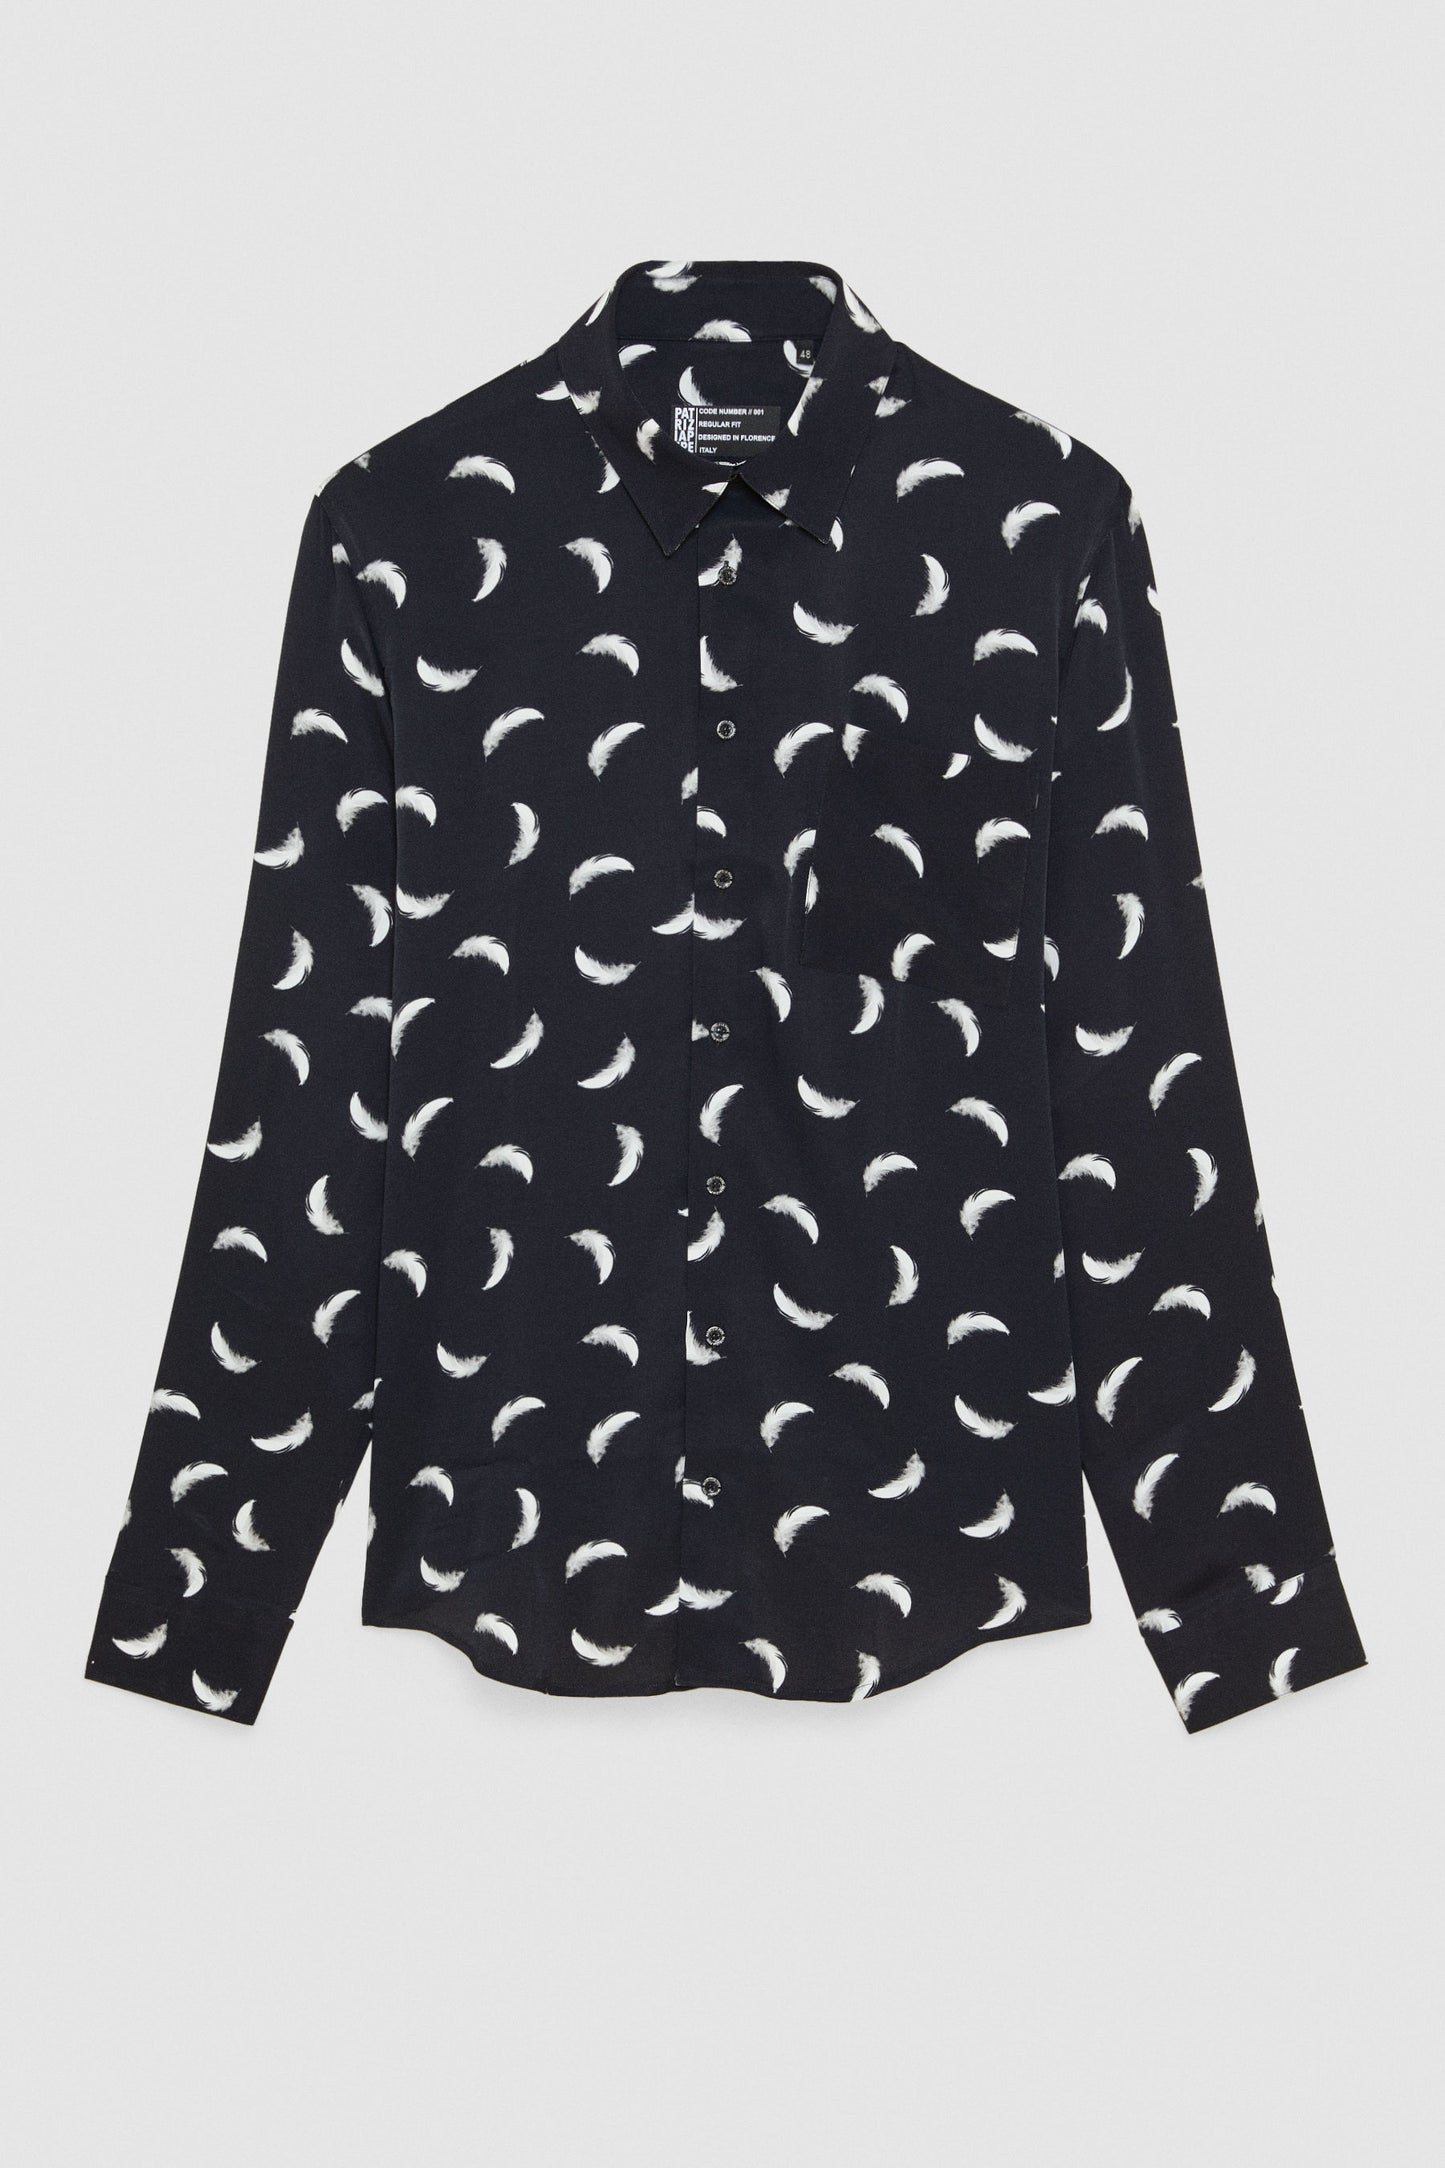 Black Feathers Patterned shirt with breast pocket